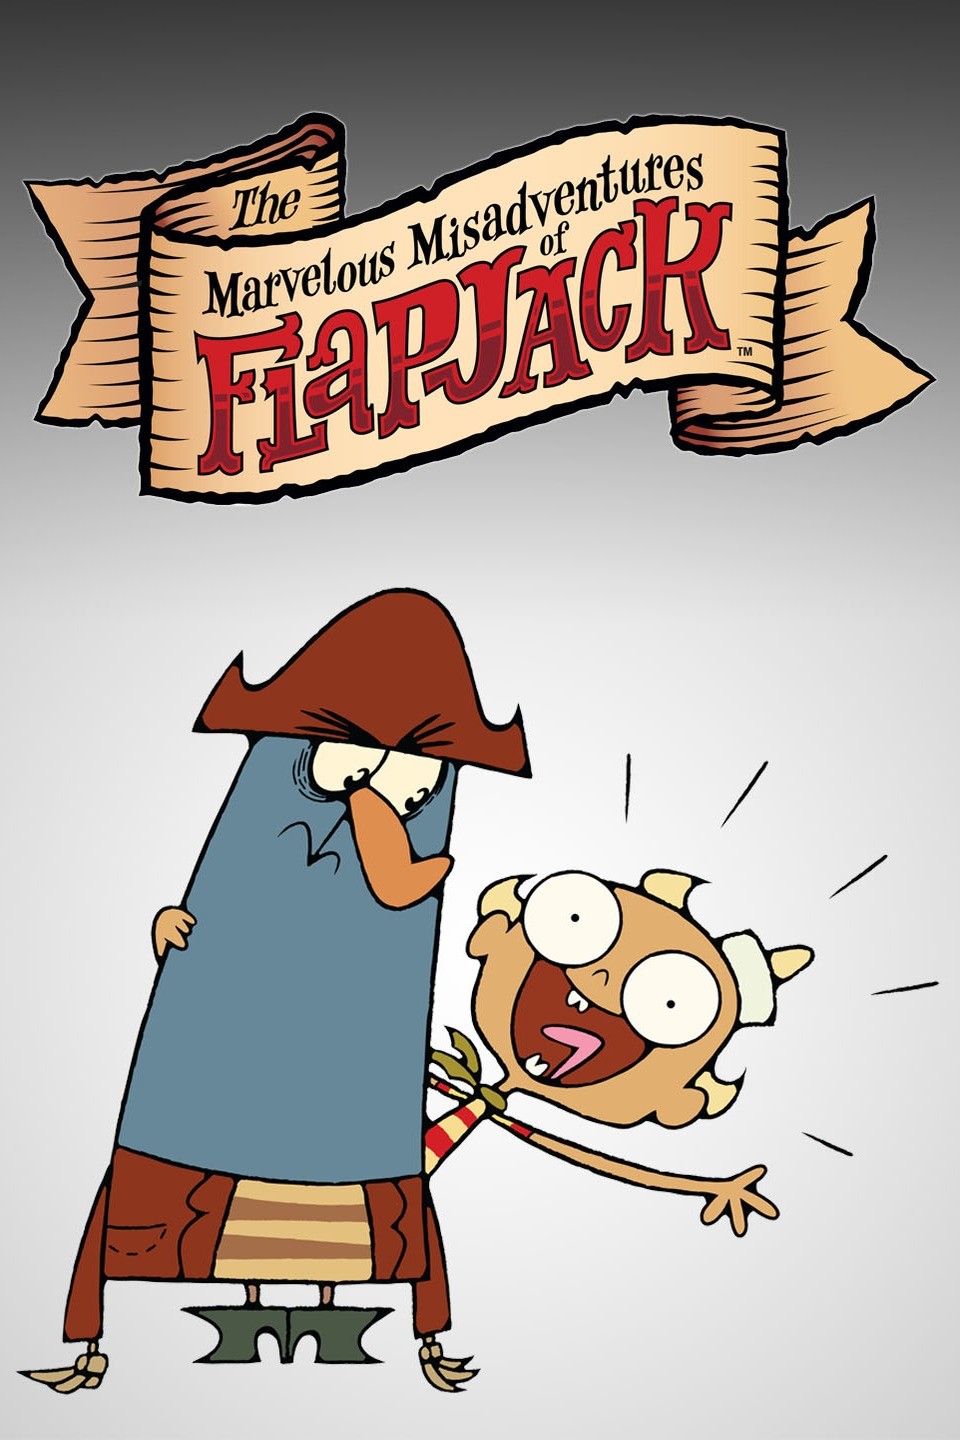 The Marvelous Misadventures of Flapjack | Rotten Tomatoes